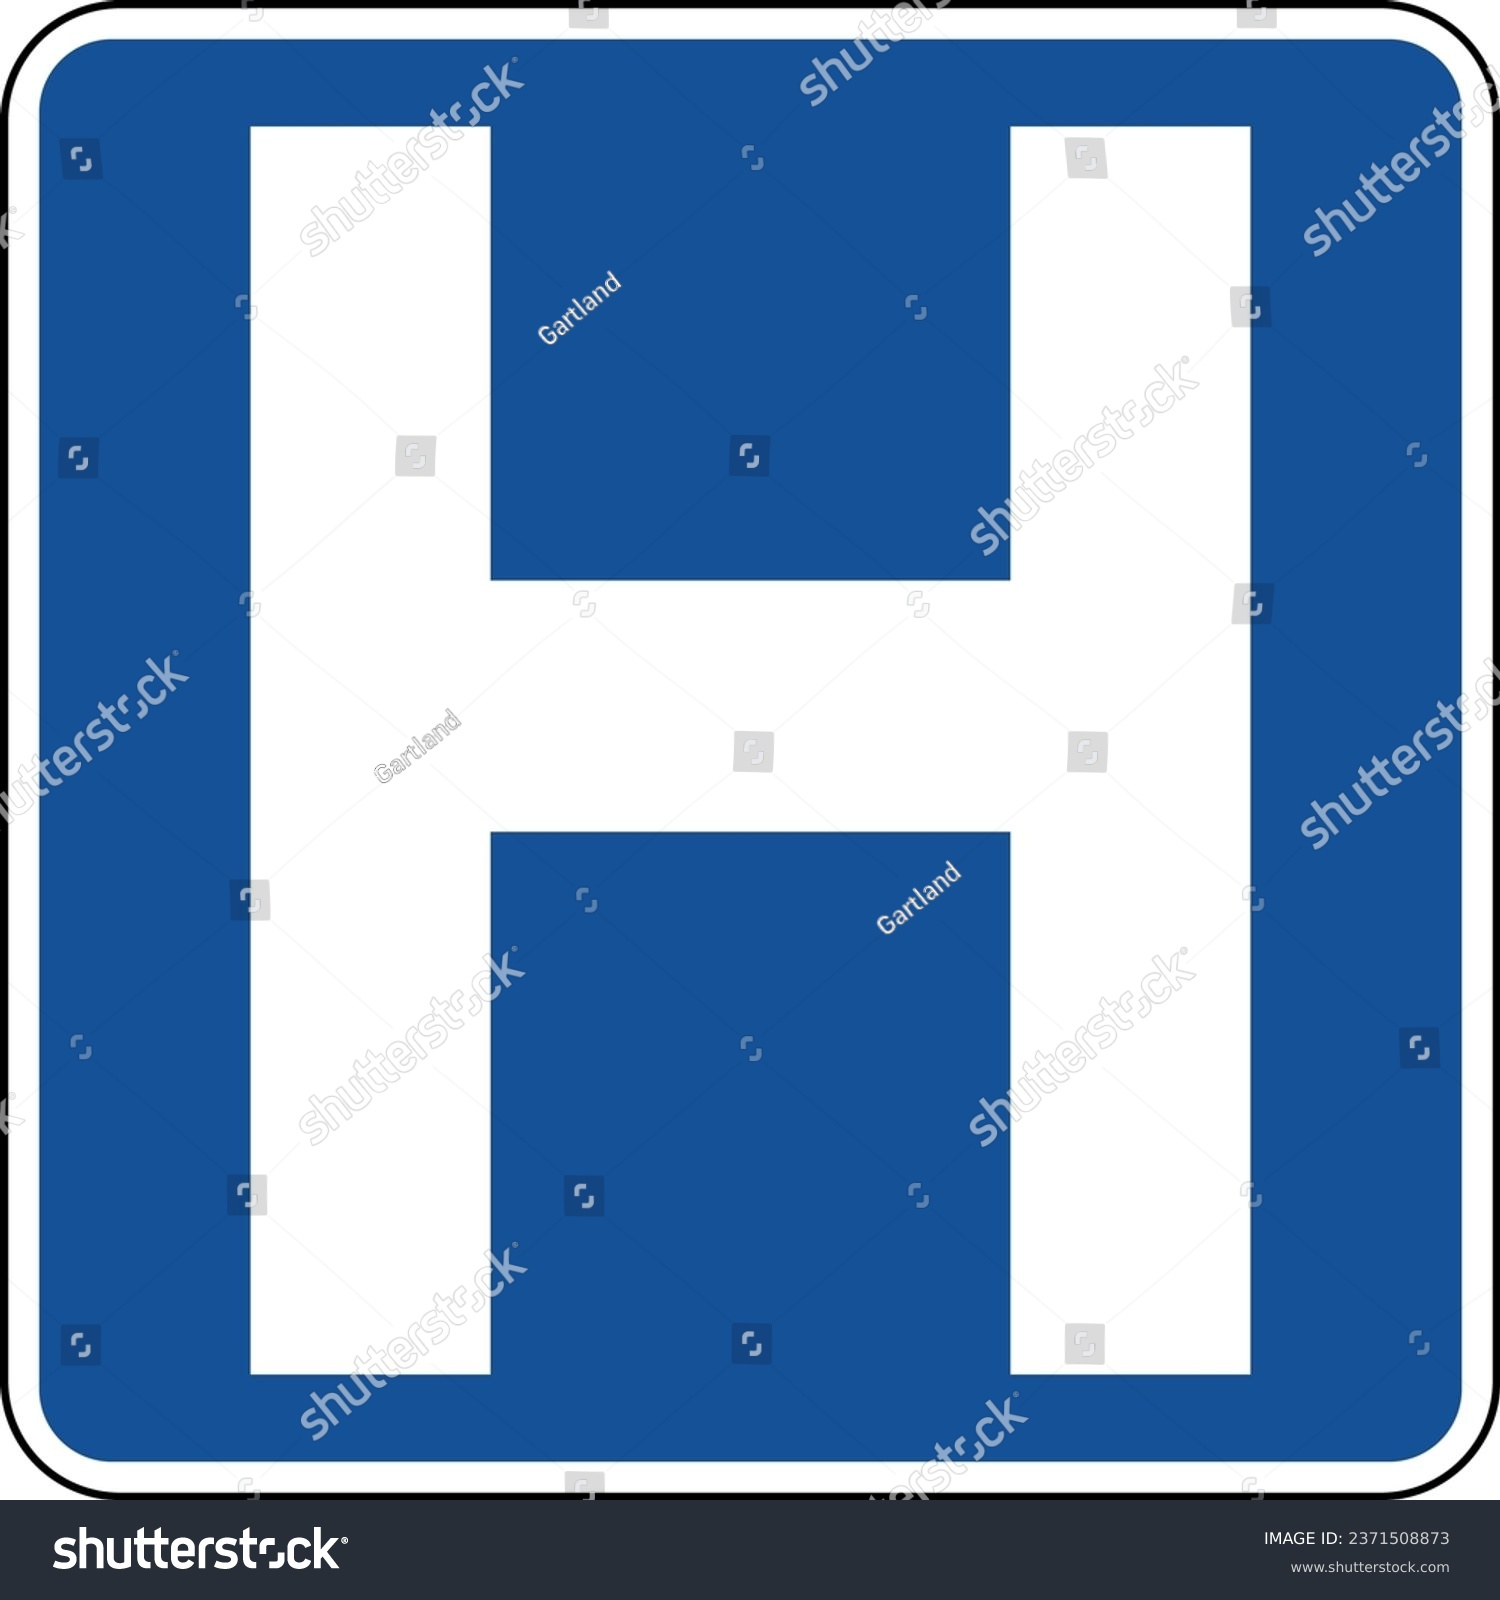 SVG of Vector graphic of a blue usa Hospital mutcd highway sign. It consists of a large letter H contained in a blue square svg